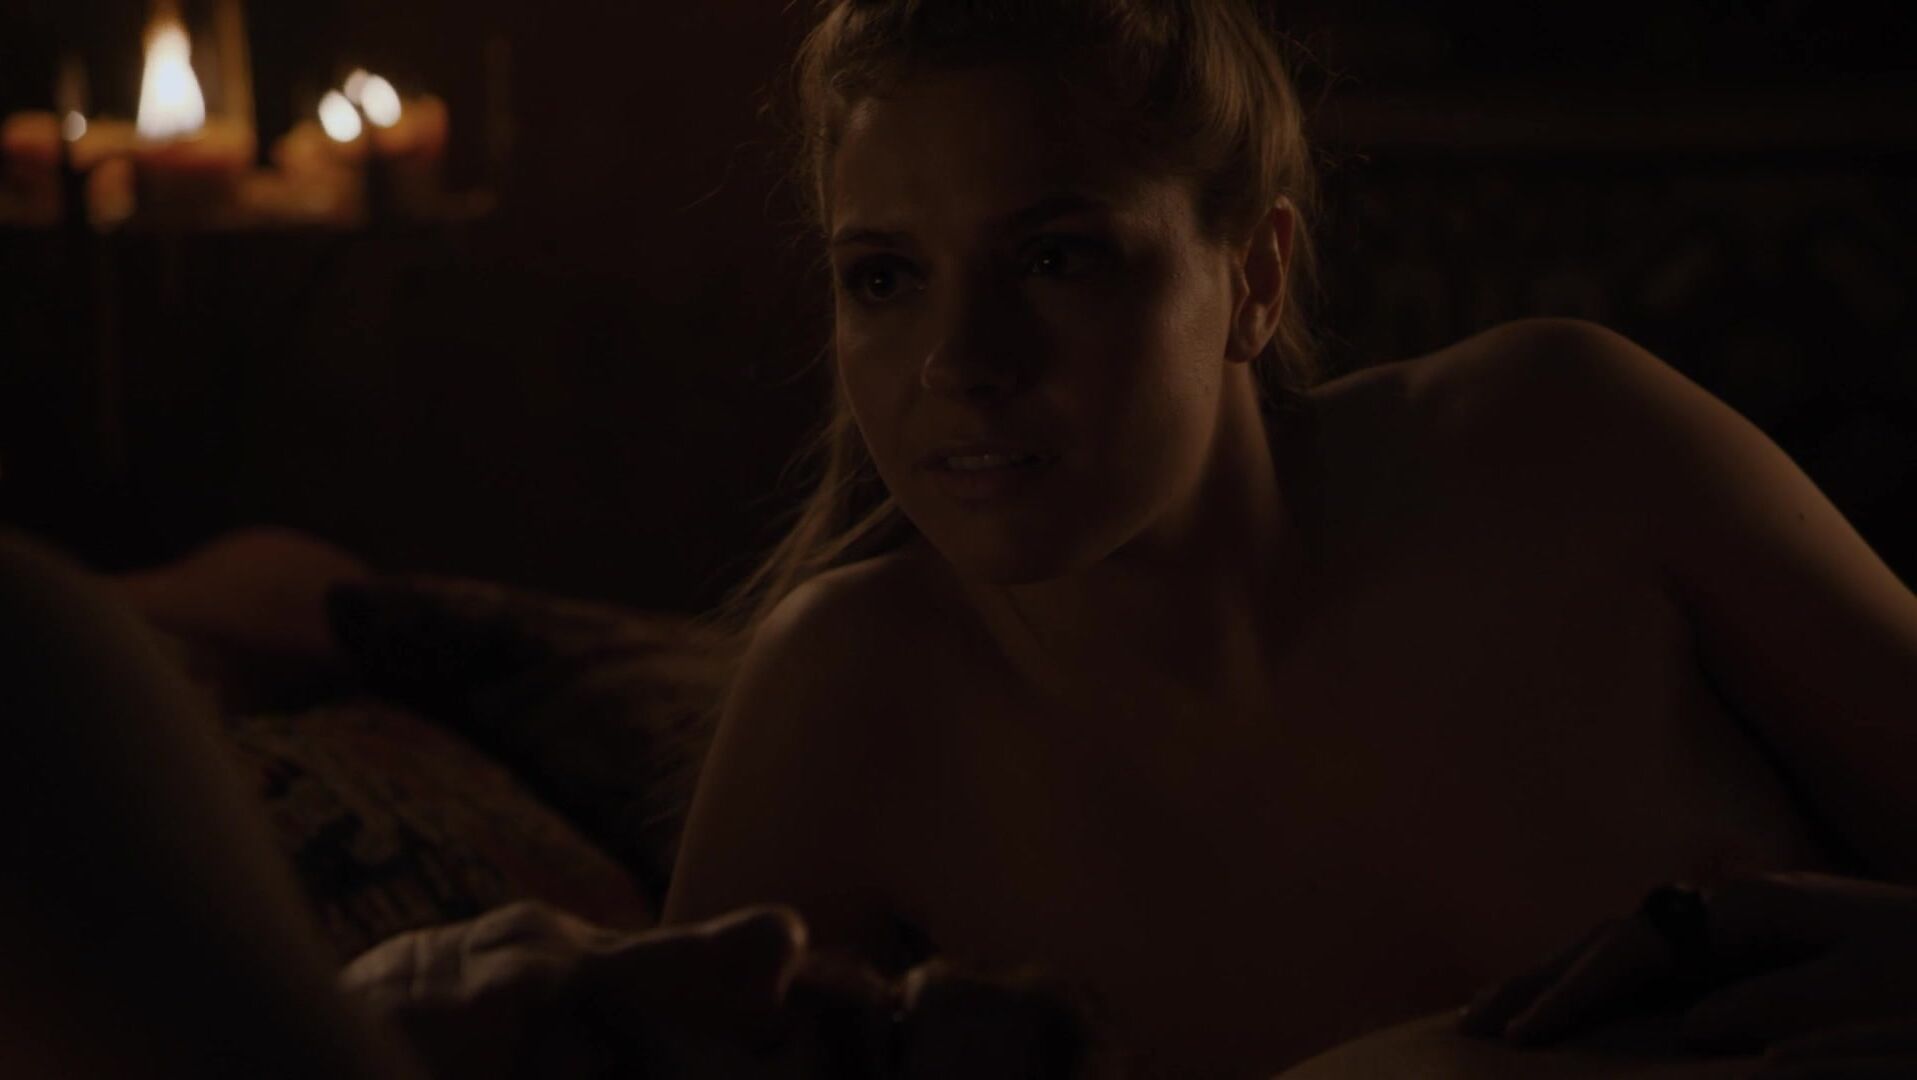 Reality Porn Marina Lawrence-Mahrra goes nude in Game of Thrones s08e01 (2019) Vip-File